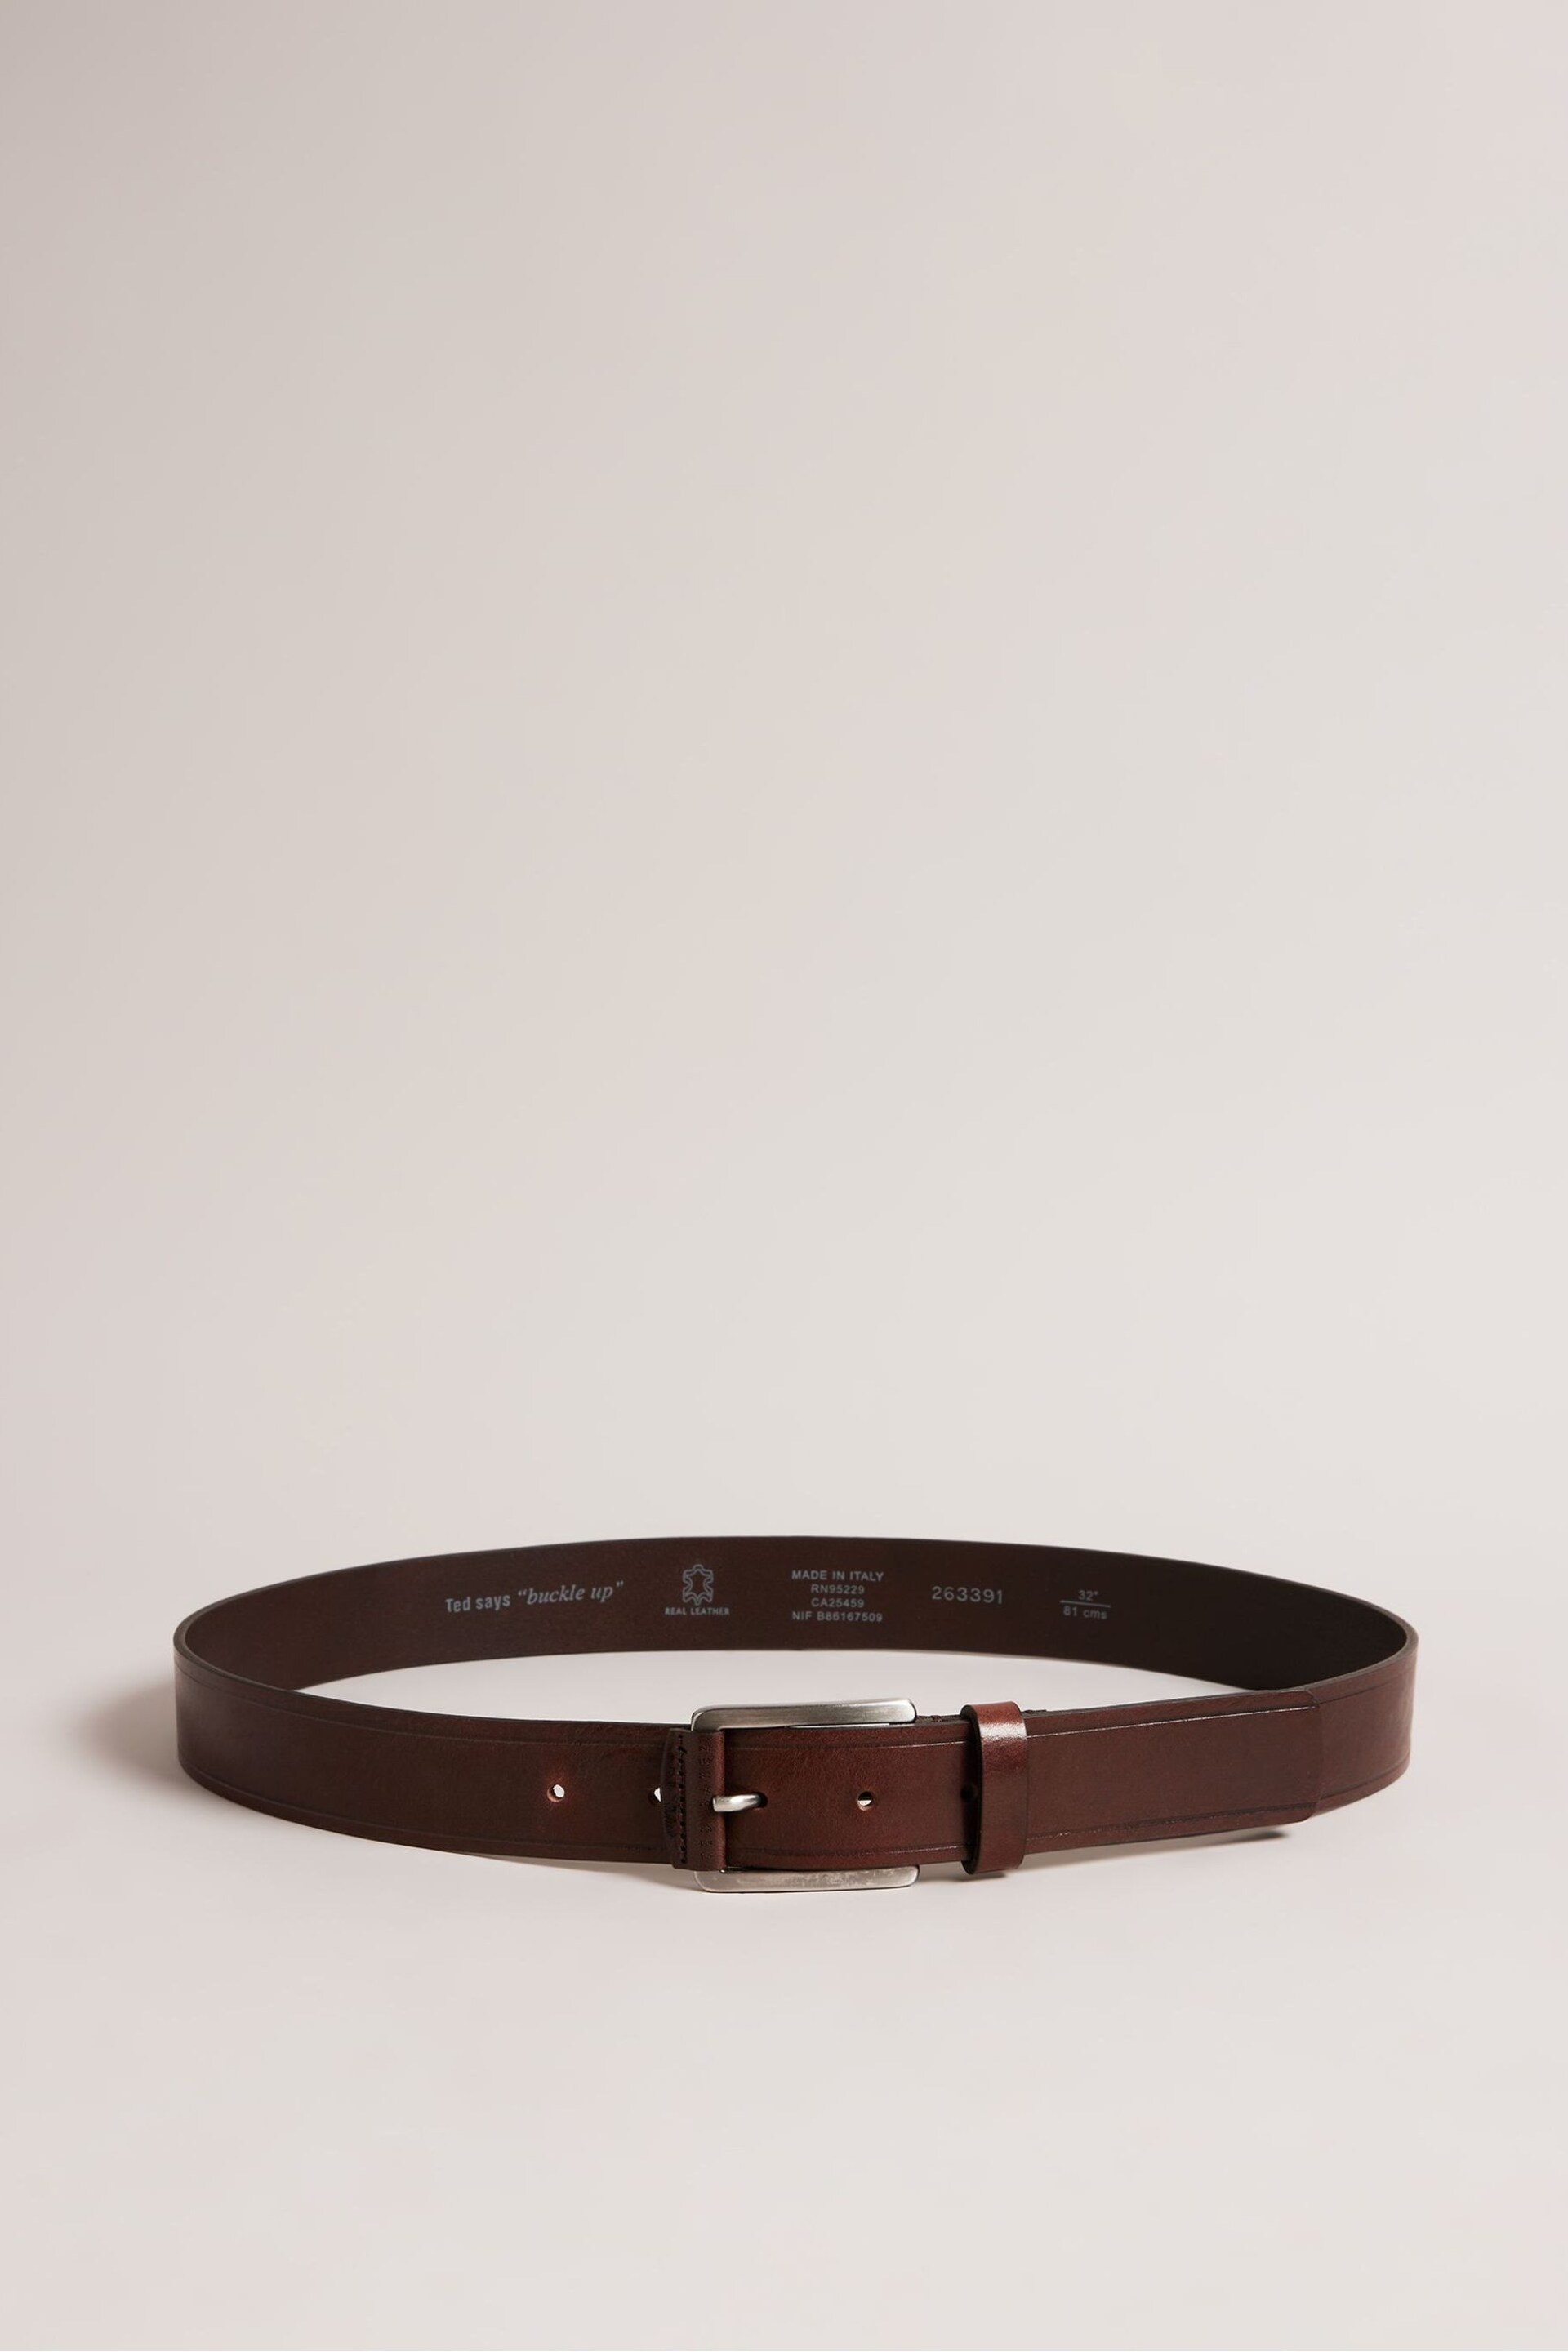 Ted Baker Brown Lined Embossed Leather Belt - Image 1 of 4